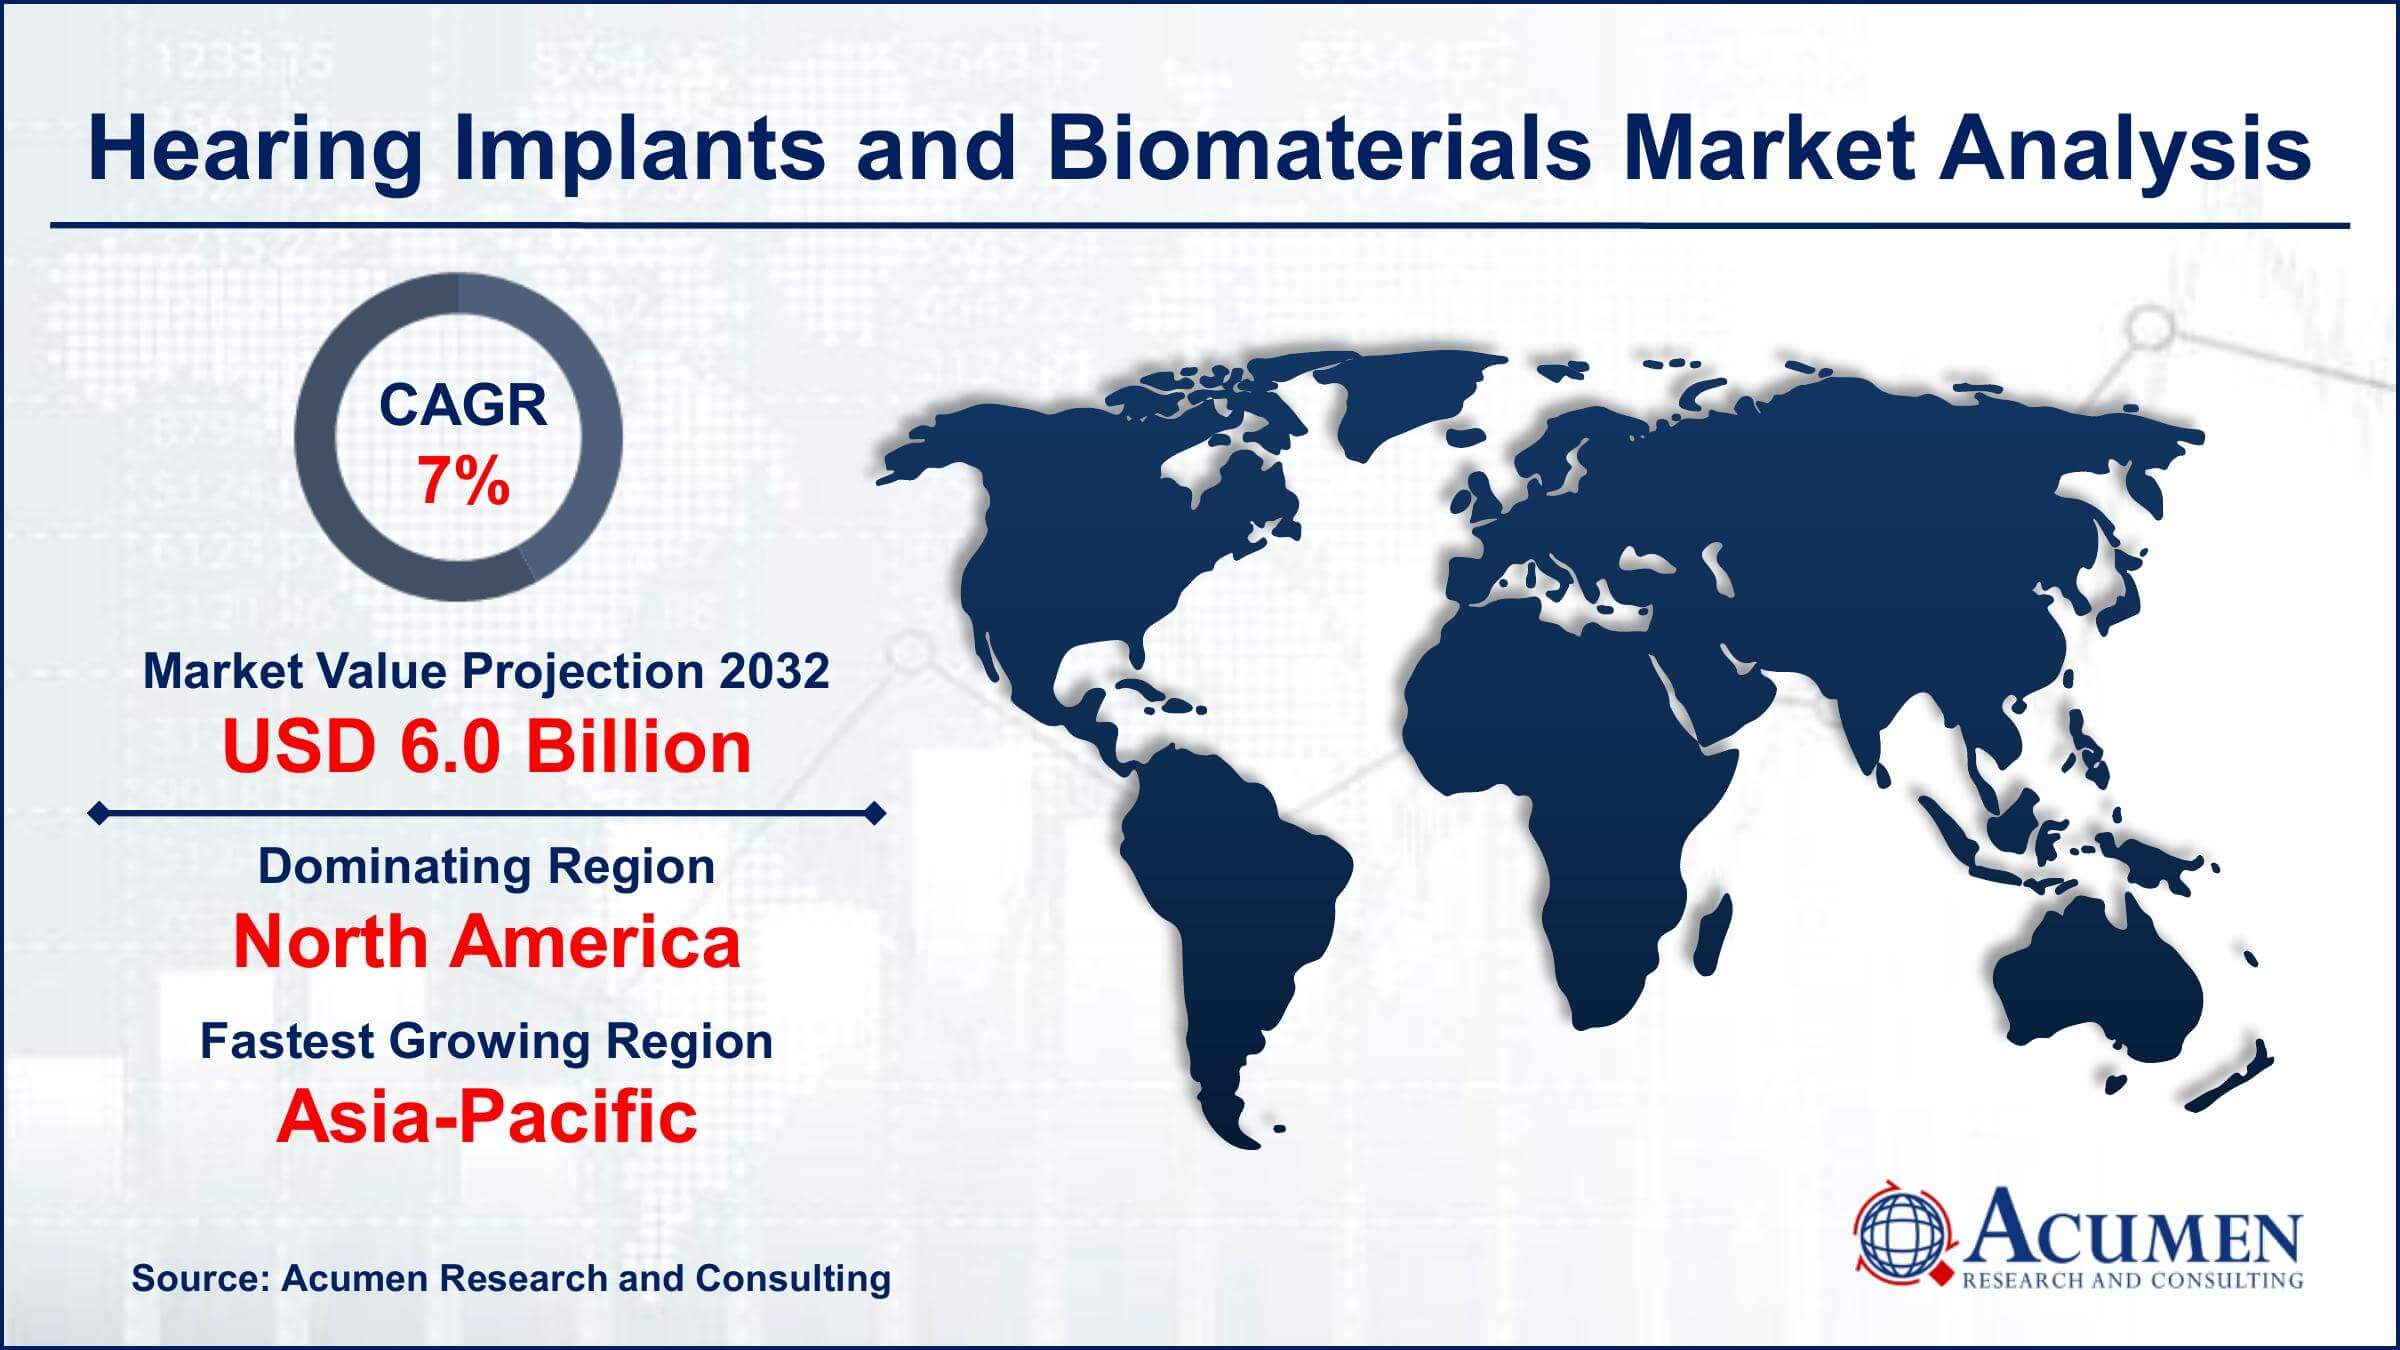 Global Hearing Implants and Biomaterials Market Trends